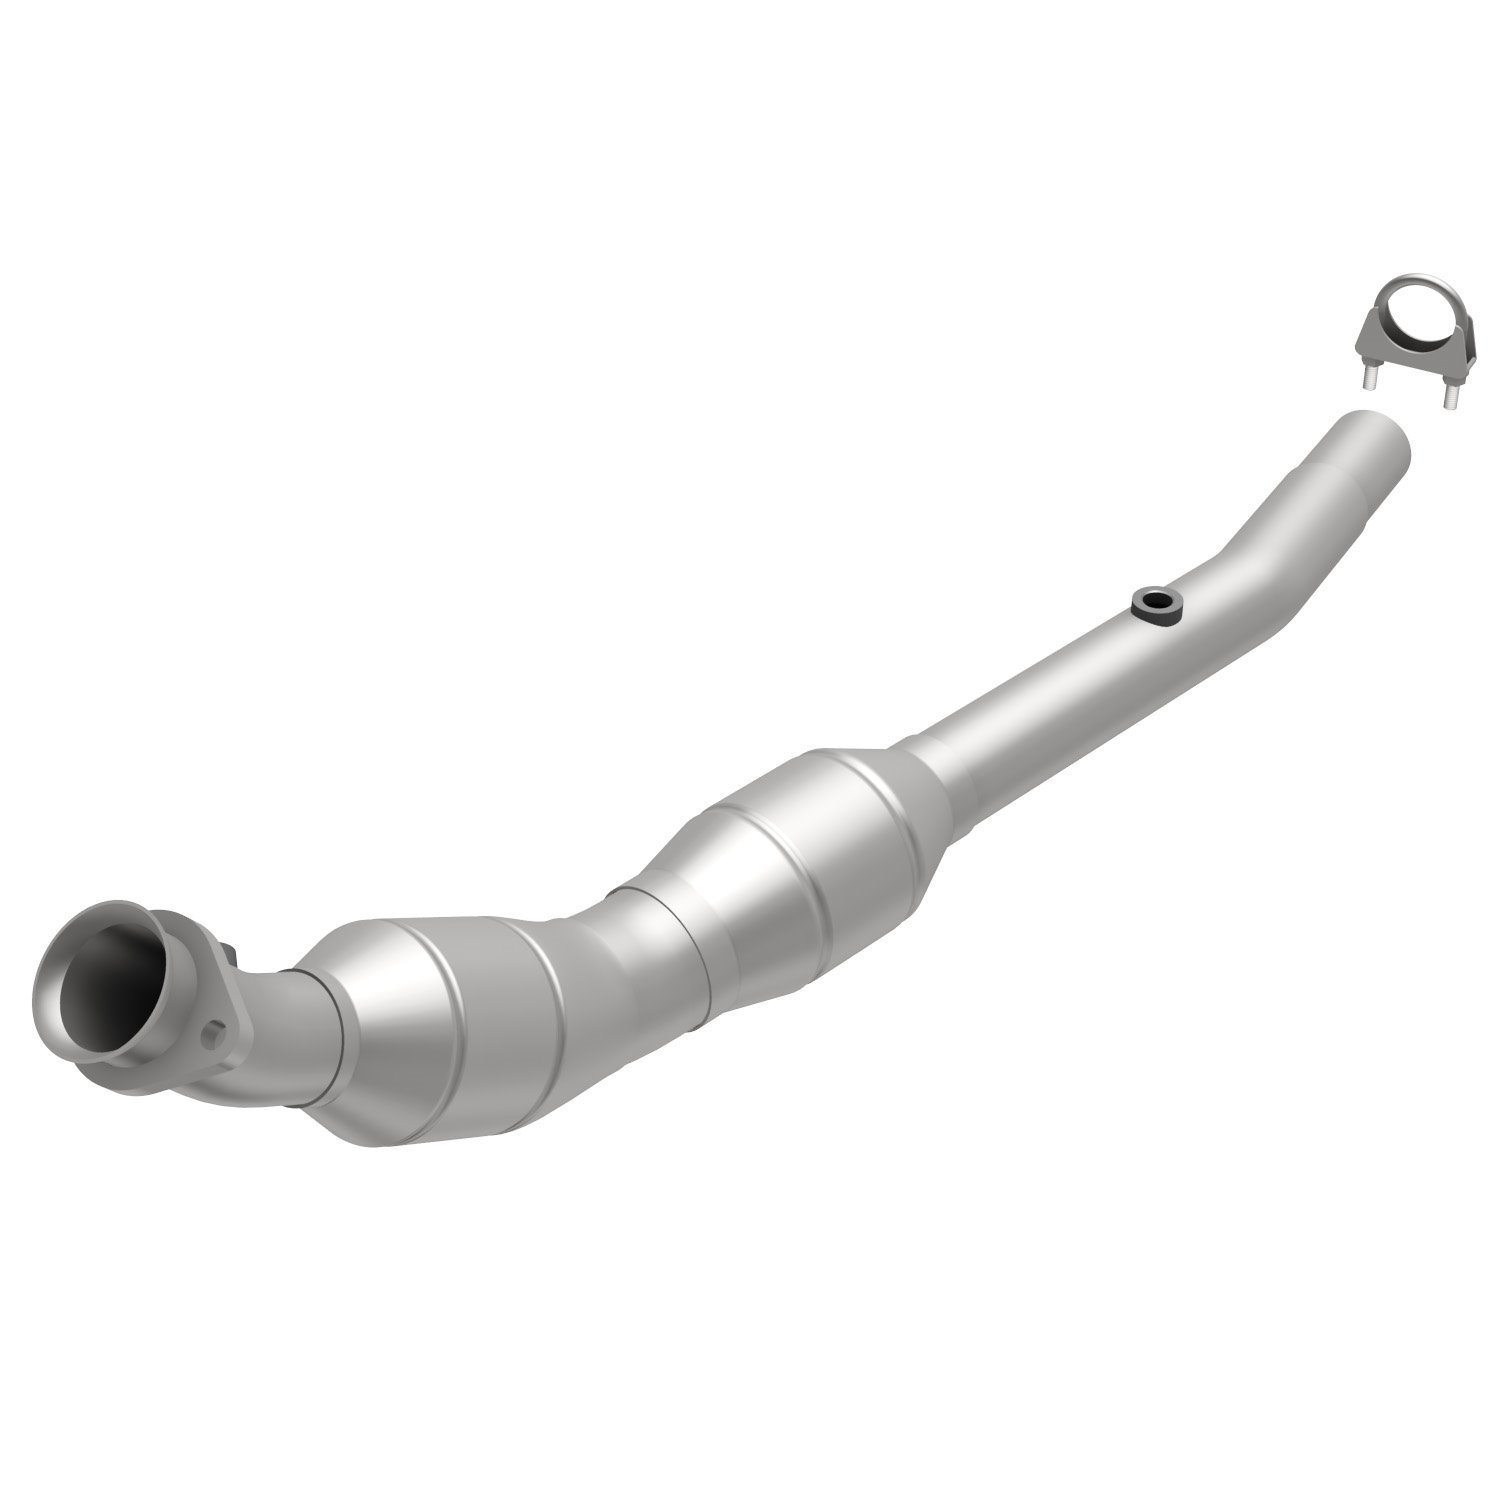 2003-2005 Land Rover Range Rover HM Grade Federal / EPA Compliant Direct-Fit Catalytic Converter